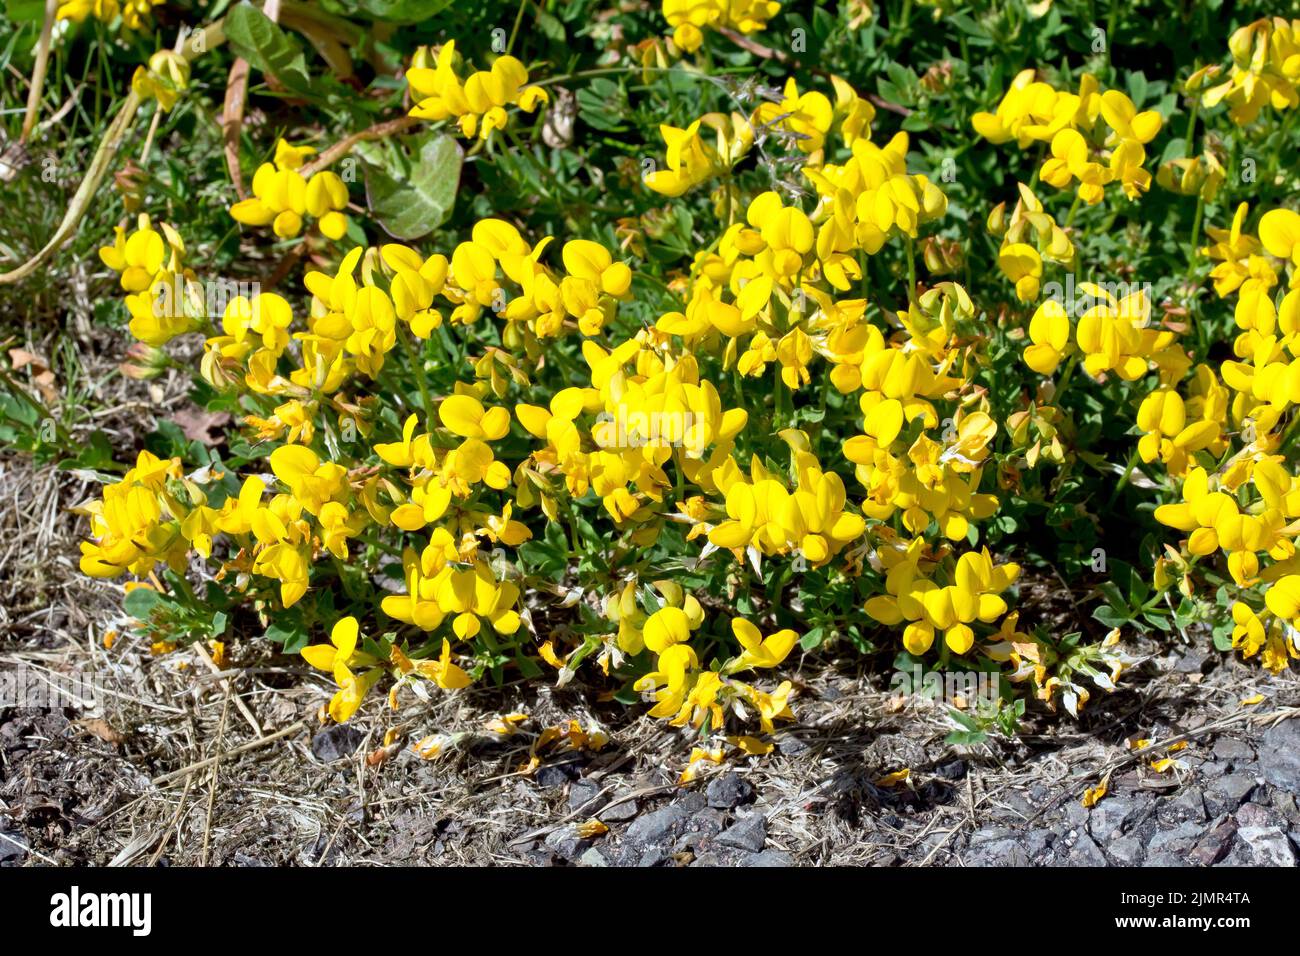 Bird's-foot Trefoil (lotus corniculatus), close up showing the common yellow-flowered plant growing out from the grass verge across the pavement. Stock Photo